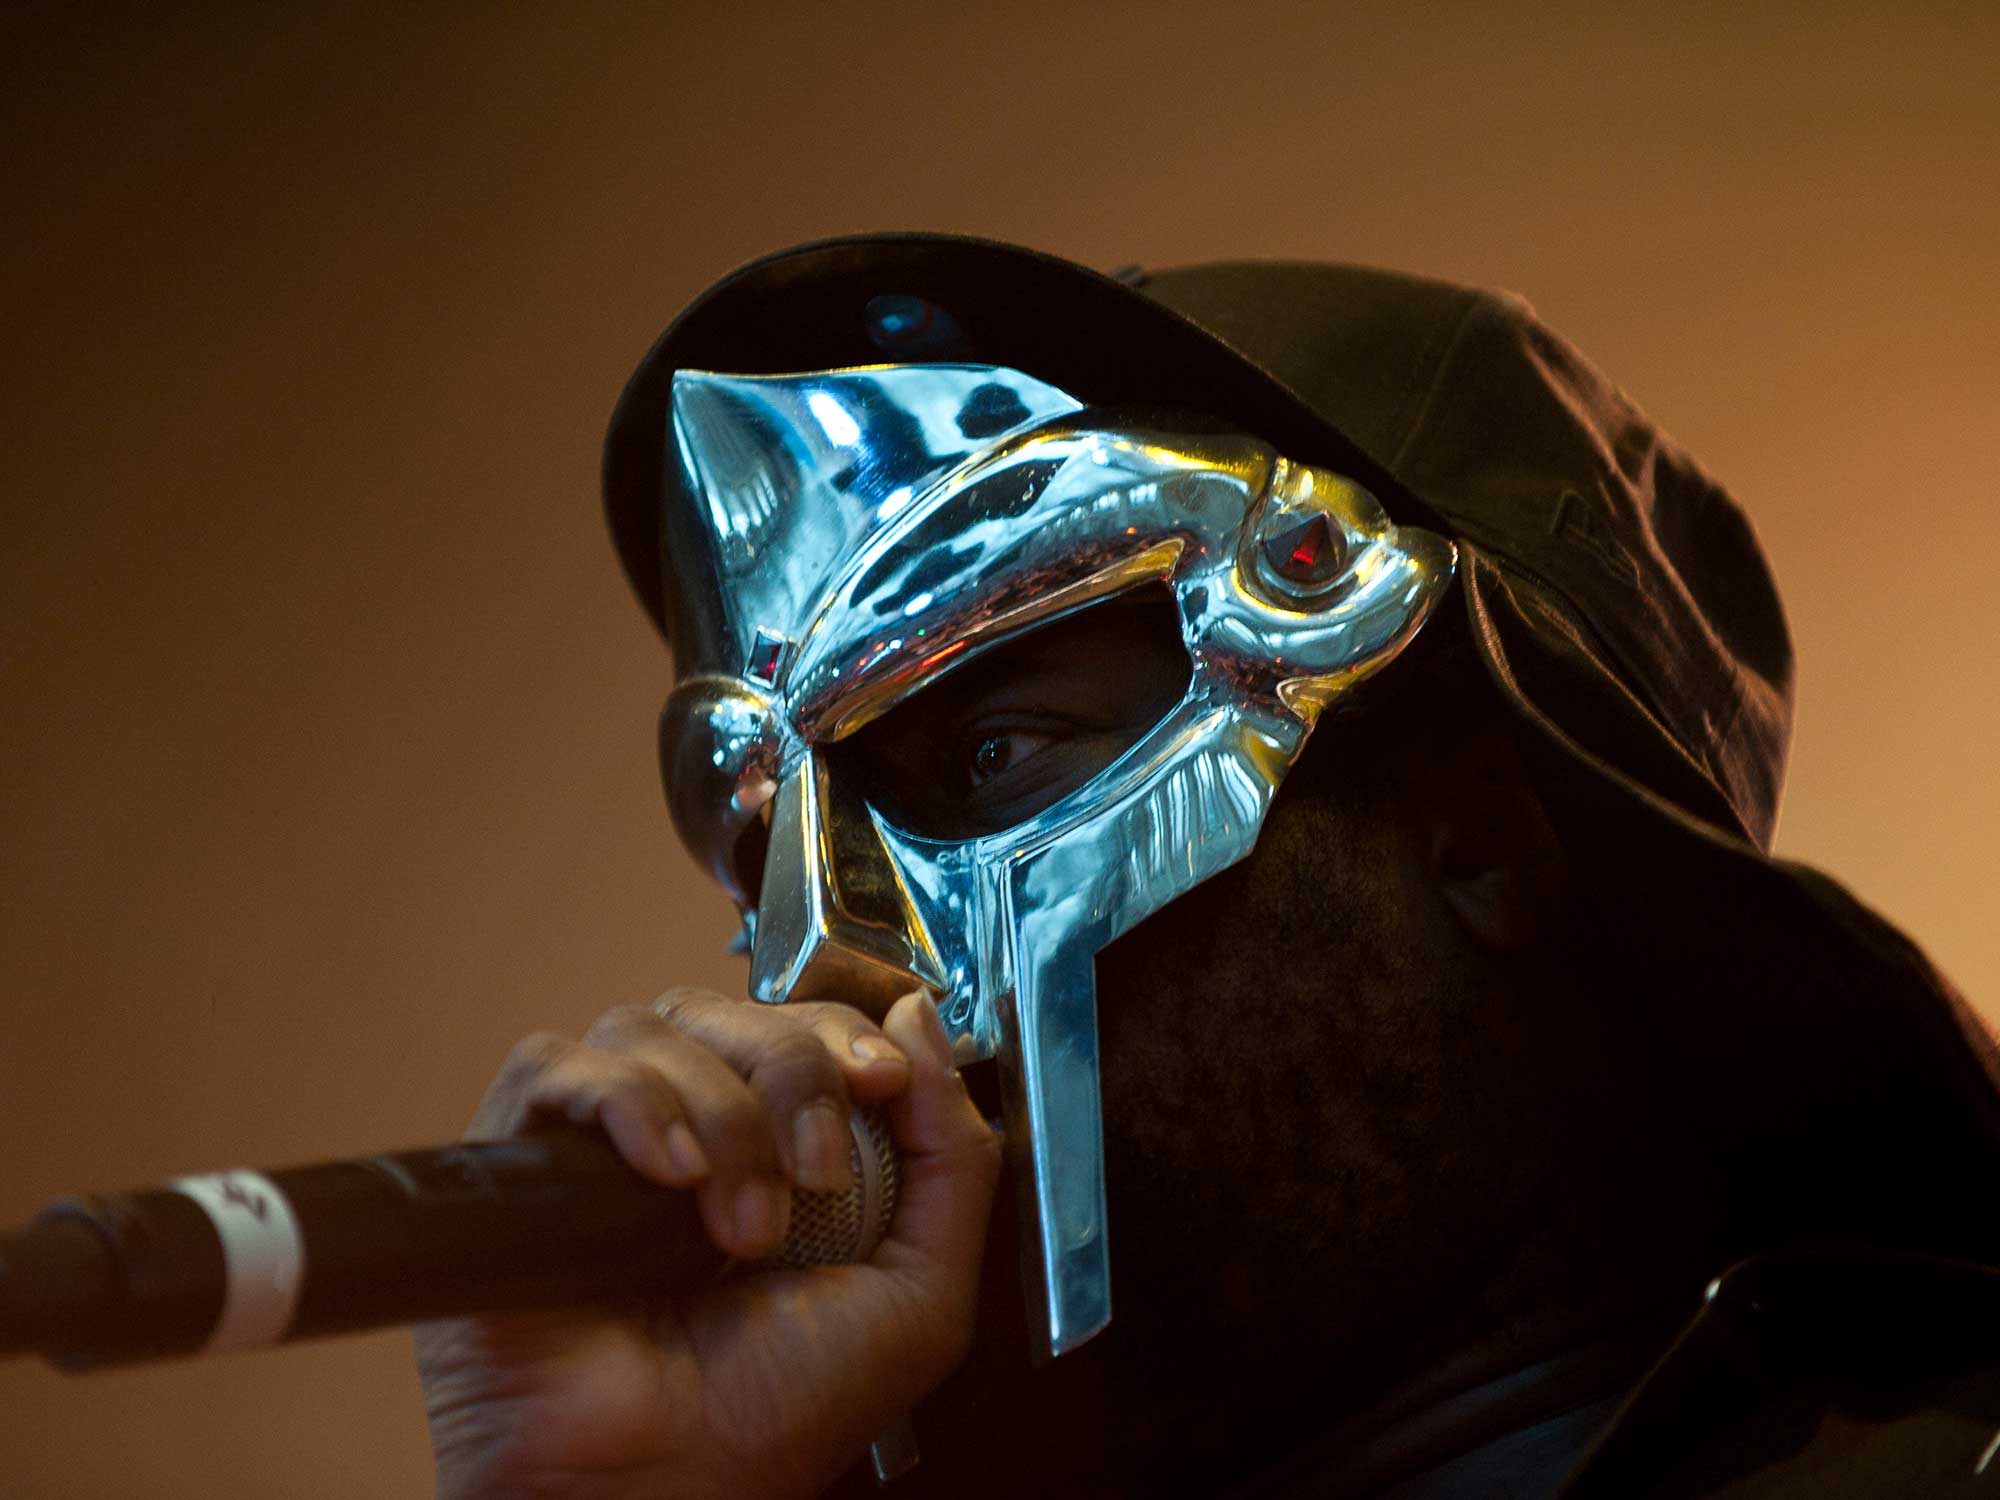 MF DOOM performs on day one of 'I'll Be Your Mirror' at Alexandra Palace on July 23, 2011 in London, England.